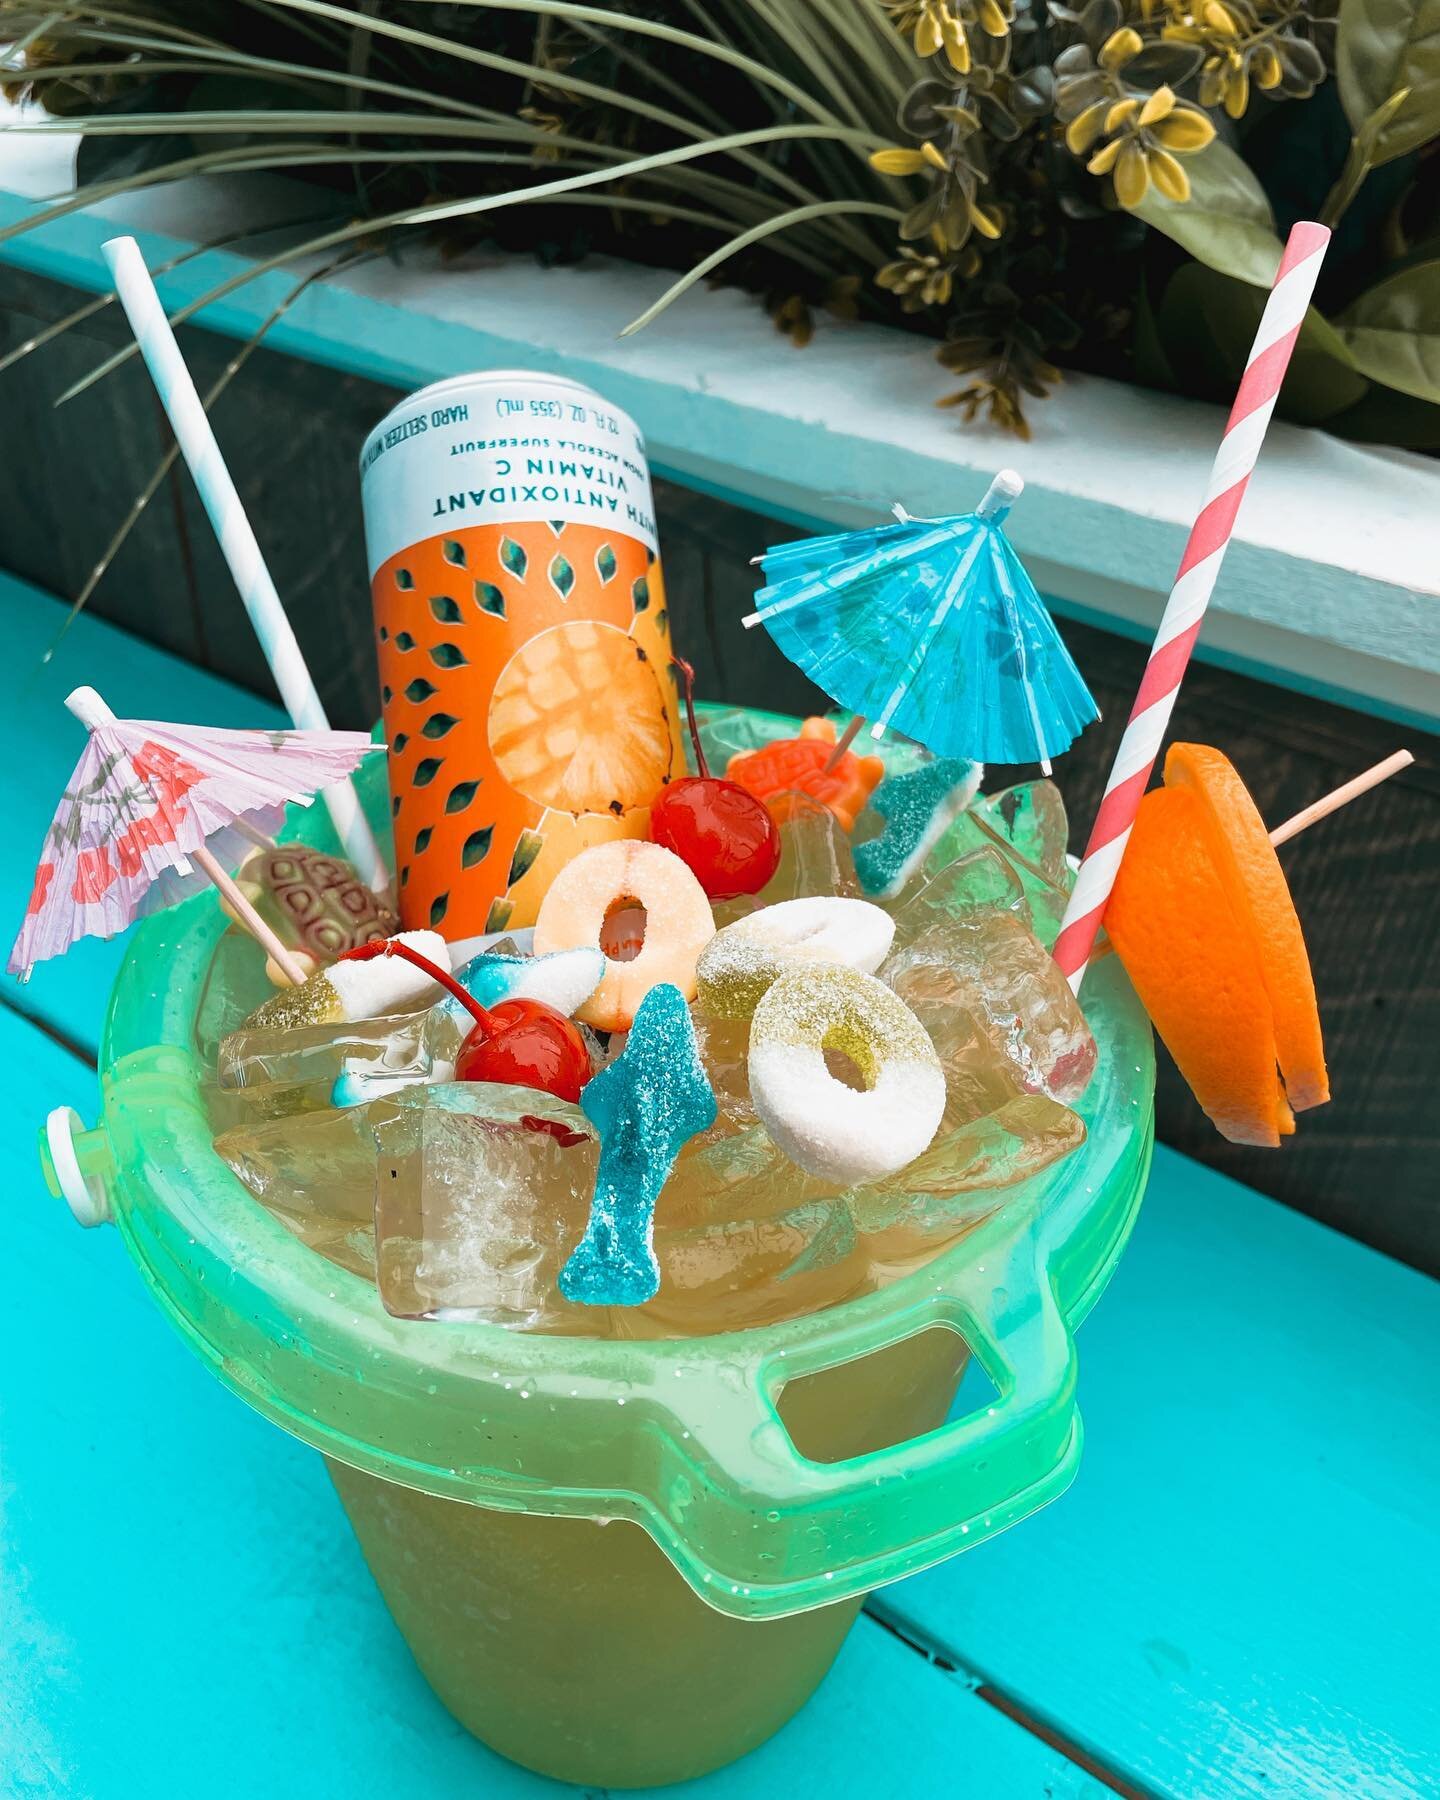 Have you had your vitamin - sea bucket yet?  Come chill 4th of July weekend with us! 🍍🌴🍒🥭🍹 @djyemi goes on at 10 pm! The club is baaack, baby!